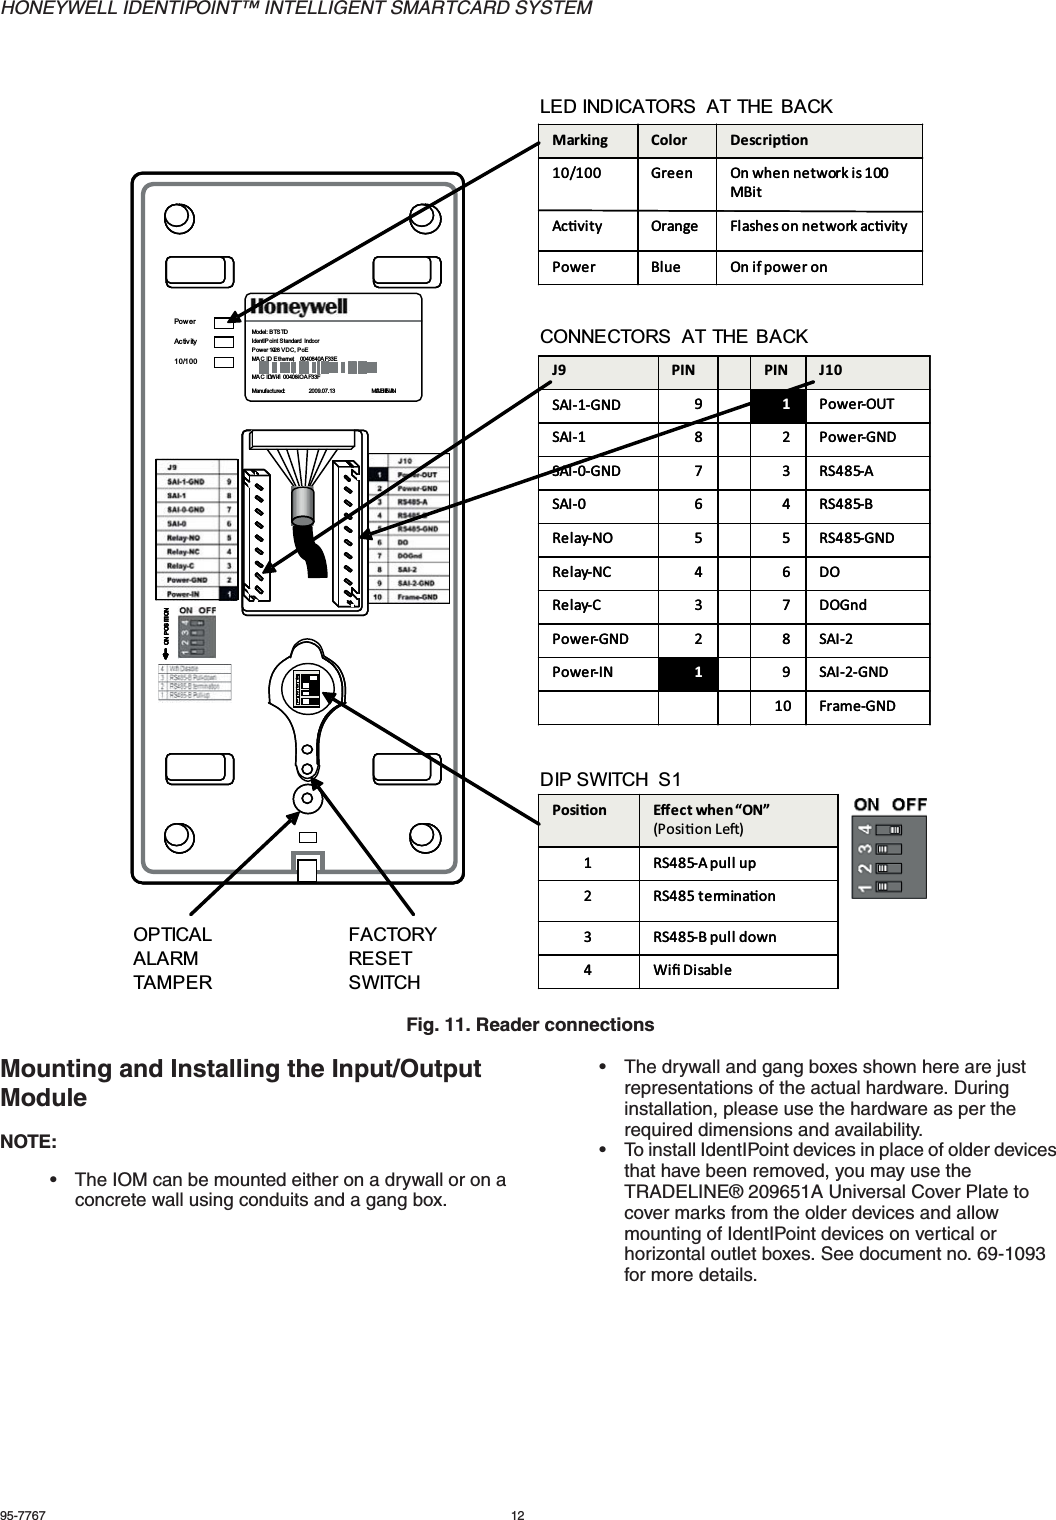 HONEYWELL IDENTIPOINT™ INTELLIGENT SMARTCARD SYSTEM95-7767 12Fig. 11. Reader connectionsMounting and Installing the Input/Output ModuleNOTE:• The IOM can be mounted either on a drywall or on a concrete wall using conduits and a gang box.• The drywall and gang boxes shown here are just representations of the actual hardware. During installation, please use the hardware as per the required dimensions and availability. • To install IdentIPoint devices in place of older devices that have been removed, you may use the TRADELINE® 209651A Universal Cover Plate to cover marks from the older devices and allow mounting of IdentIPoint devices on vertical or horizontal outlet boxes. See document no. 69-1093 for more details.10/100Ac tiv i tyPo w e rModel: BTSTDIdentIP oint S tandard  IndoorPower 10-28 VDC, PoEMAC ID E thernet    0040840A F33EMA C ID  W i-fi 00408-IO A F33FManufactured:                2009.07.13                        MA DE  IN CHINAON P OSITIONON P OSITIONON P OSITIONON P OSITION1234123412341234123410/100Ac tiv i tyPo w e rModel: BTSTDIdentIP oint S tandard  IndoorPower 10-28 VDC, PoEMAC ID E thernet    0040840A F33EMA C ID  W i-fi 00408-IO A F33FManufactured:                2009.07.13                        MA DE  IN CHINAON P OSITIONON P OSITIONON P OSITIONON P OSITION12341234123412341234Marking Color Descripon10/100 Green On when network is 100 MBitAcvity Orange Flashes on network acvityPower Blue On if power onMarking Color Descripon10/100 Green On when network is 100 MBitAcvity Orange Flashes on network acvityPower Blue On if power onJ9 PIN PIN J10SAI-1-GND 91Power-OUTSAI-1 8 2 Power-GNDSAI-0-GND 7 3 RS485-ASAI-0 6 4 RS485-BRelay-NO 5 5 RS485-GNDRelay-NC 4 6 DORelay-C 3 7 DOGndPower-GND 2 8 SAI-2Power-IN 19SAI-2-GND10 Frame-GNDJ9 PIN PIN J10SAI-1-GND 91Power-OUTSAI-1 8 2 Power-GNDSAI-0-GND 7 3 RS485-ASAI-0 6 4 RS485-BRelay-NO 5 5 RS485-GNDRelay-NC 4 6 DORelay-C 3 7 DOGndPower-GND 2 8 SAI-2Power-IN 19SAI-2-GND10 Frame-GNDPosion Eﬀect when “ON”(Posion Le)1 RS485-A pull up2 RS485 terminaon3 RS485-B pull down4WiﬁDisablePosion Eﬀect when “ON”(Posion Le)1 RS485-A pull up2 RS485 terminaon3 RS485-B pull down4WiﬁDisableDIP SWITCH  S1CONNECTORS  AT THE BACKLED INDICATORS  AT THE BACKFACTORY RESET SWITCHOPTICAL ALARM TAMPER